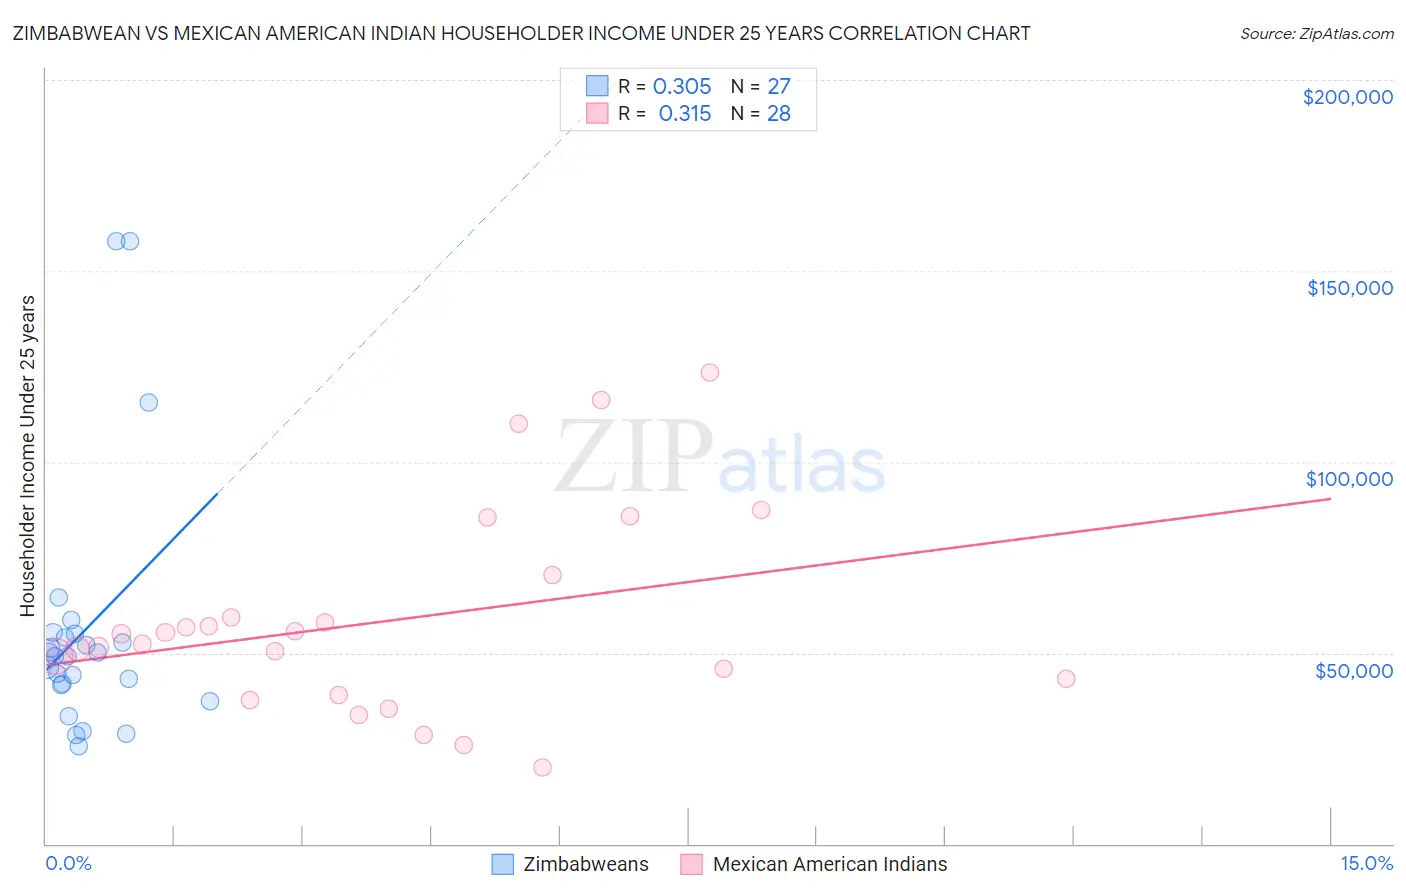 Zimbabwean vs Mexican American Indian Householder Income Under 25 years